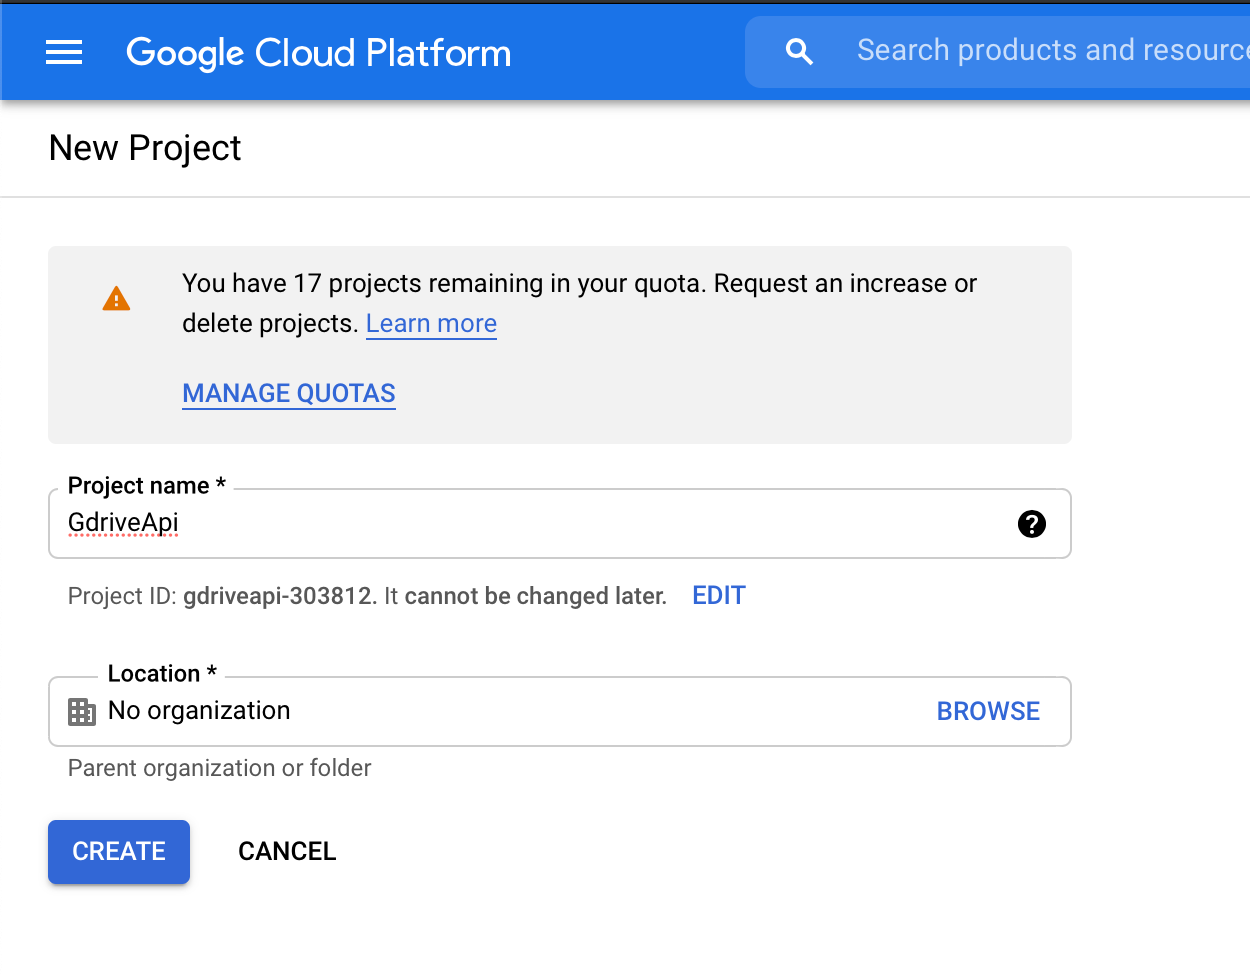 Create a new project on the Google Cloud Platform